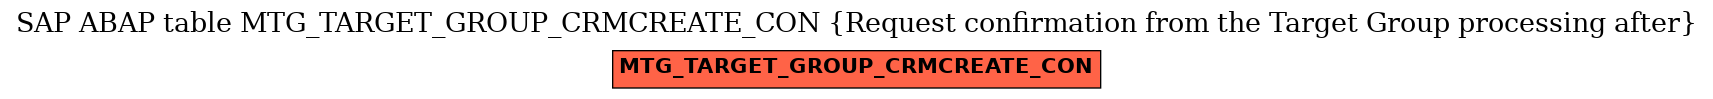 E-R Diagram for table MTG_TARGET_GROUP_CRMCREATE_CON (Request confirmation from the Target Group processing after)